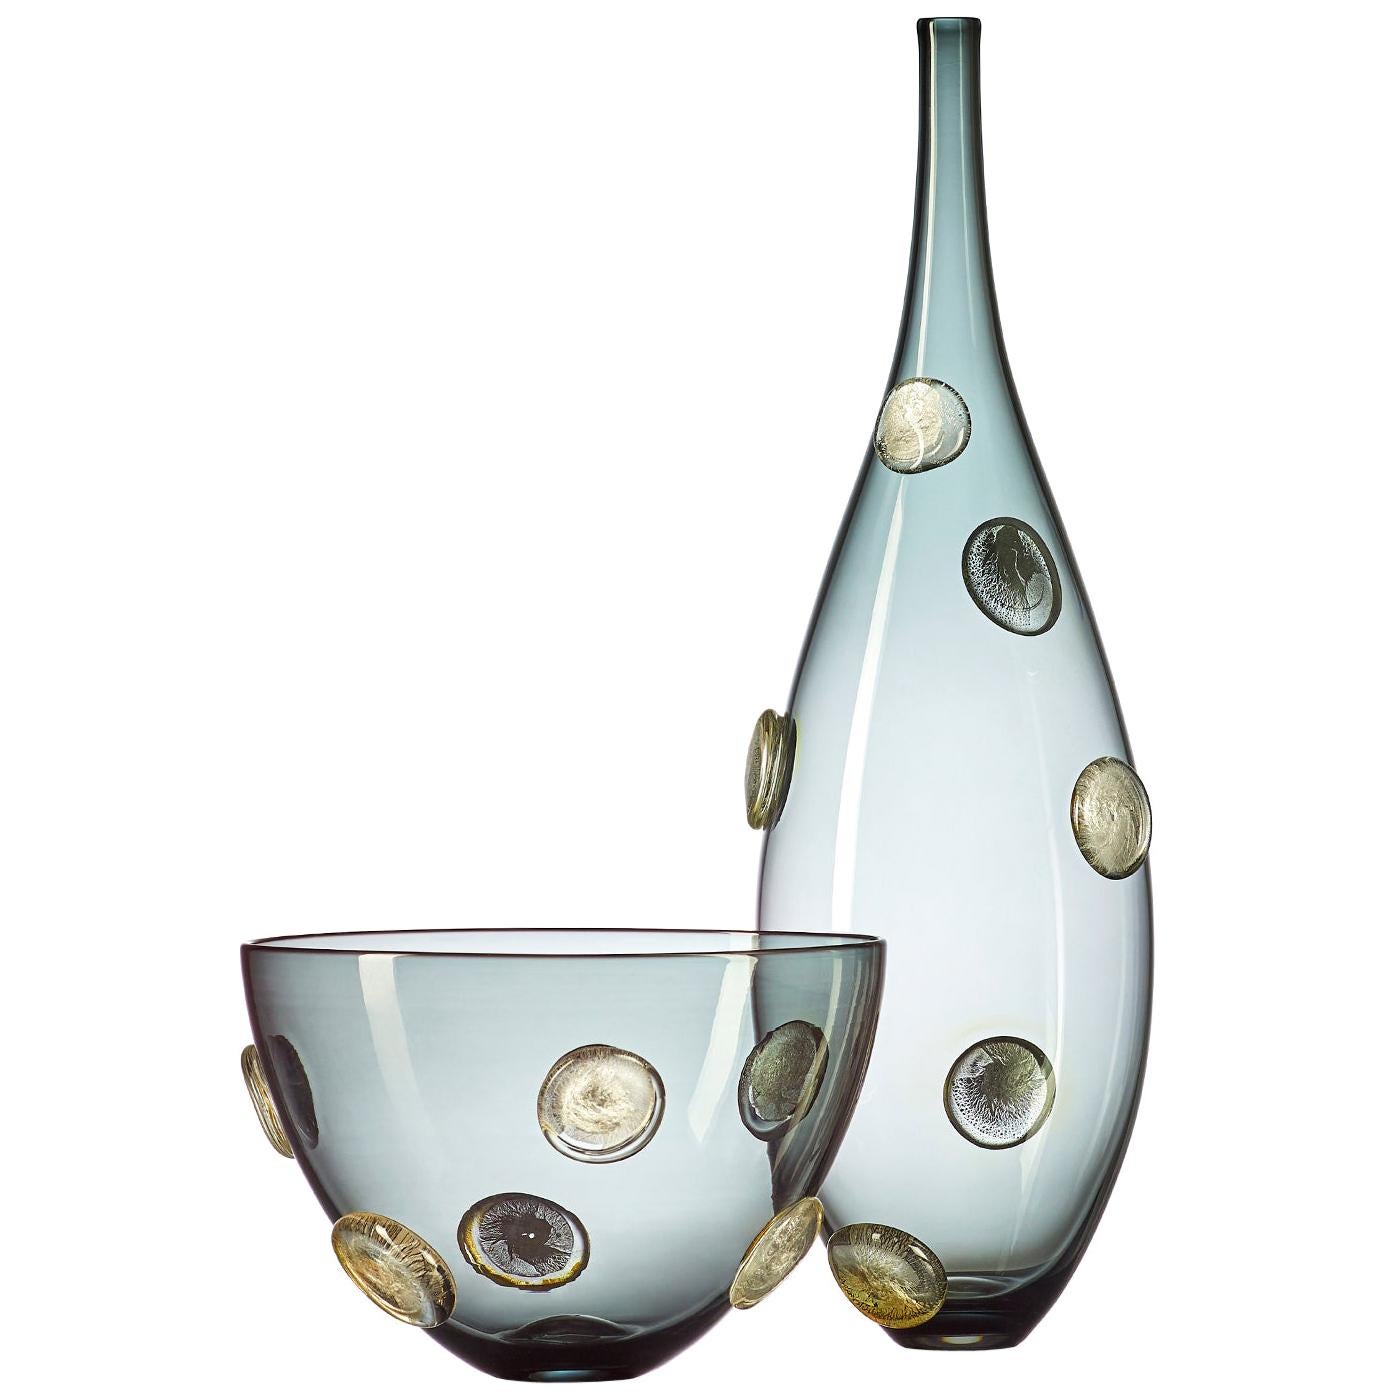 A luminous statement in translucent grey hand blown glass, the Moneta bowl with silver dots features a Cascade of raised metallic coin-shaped dots, encased in clear glass. This large scale designer vase is hand blown from start to finish by Vetro